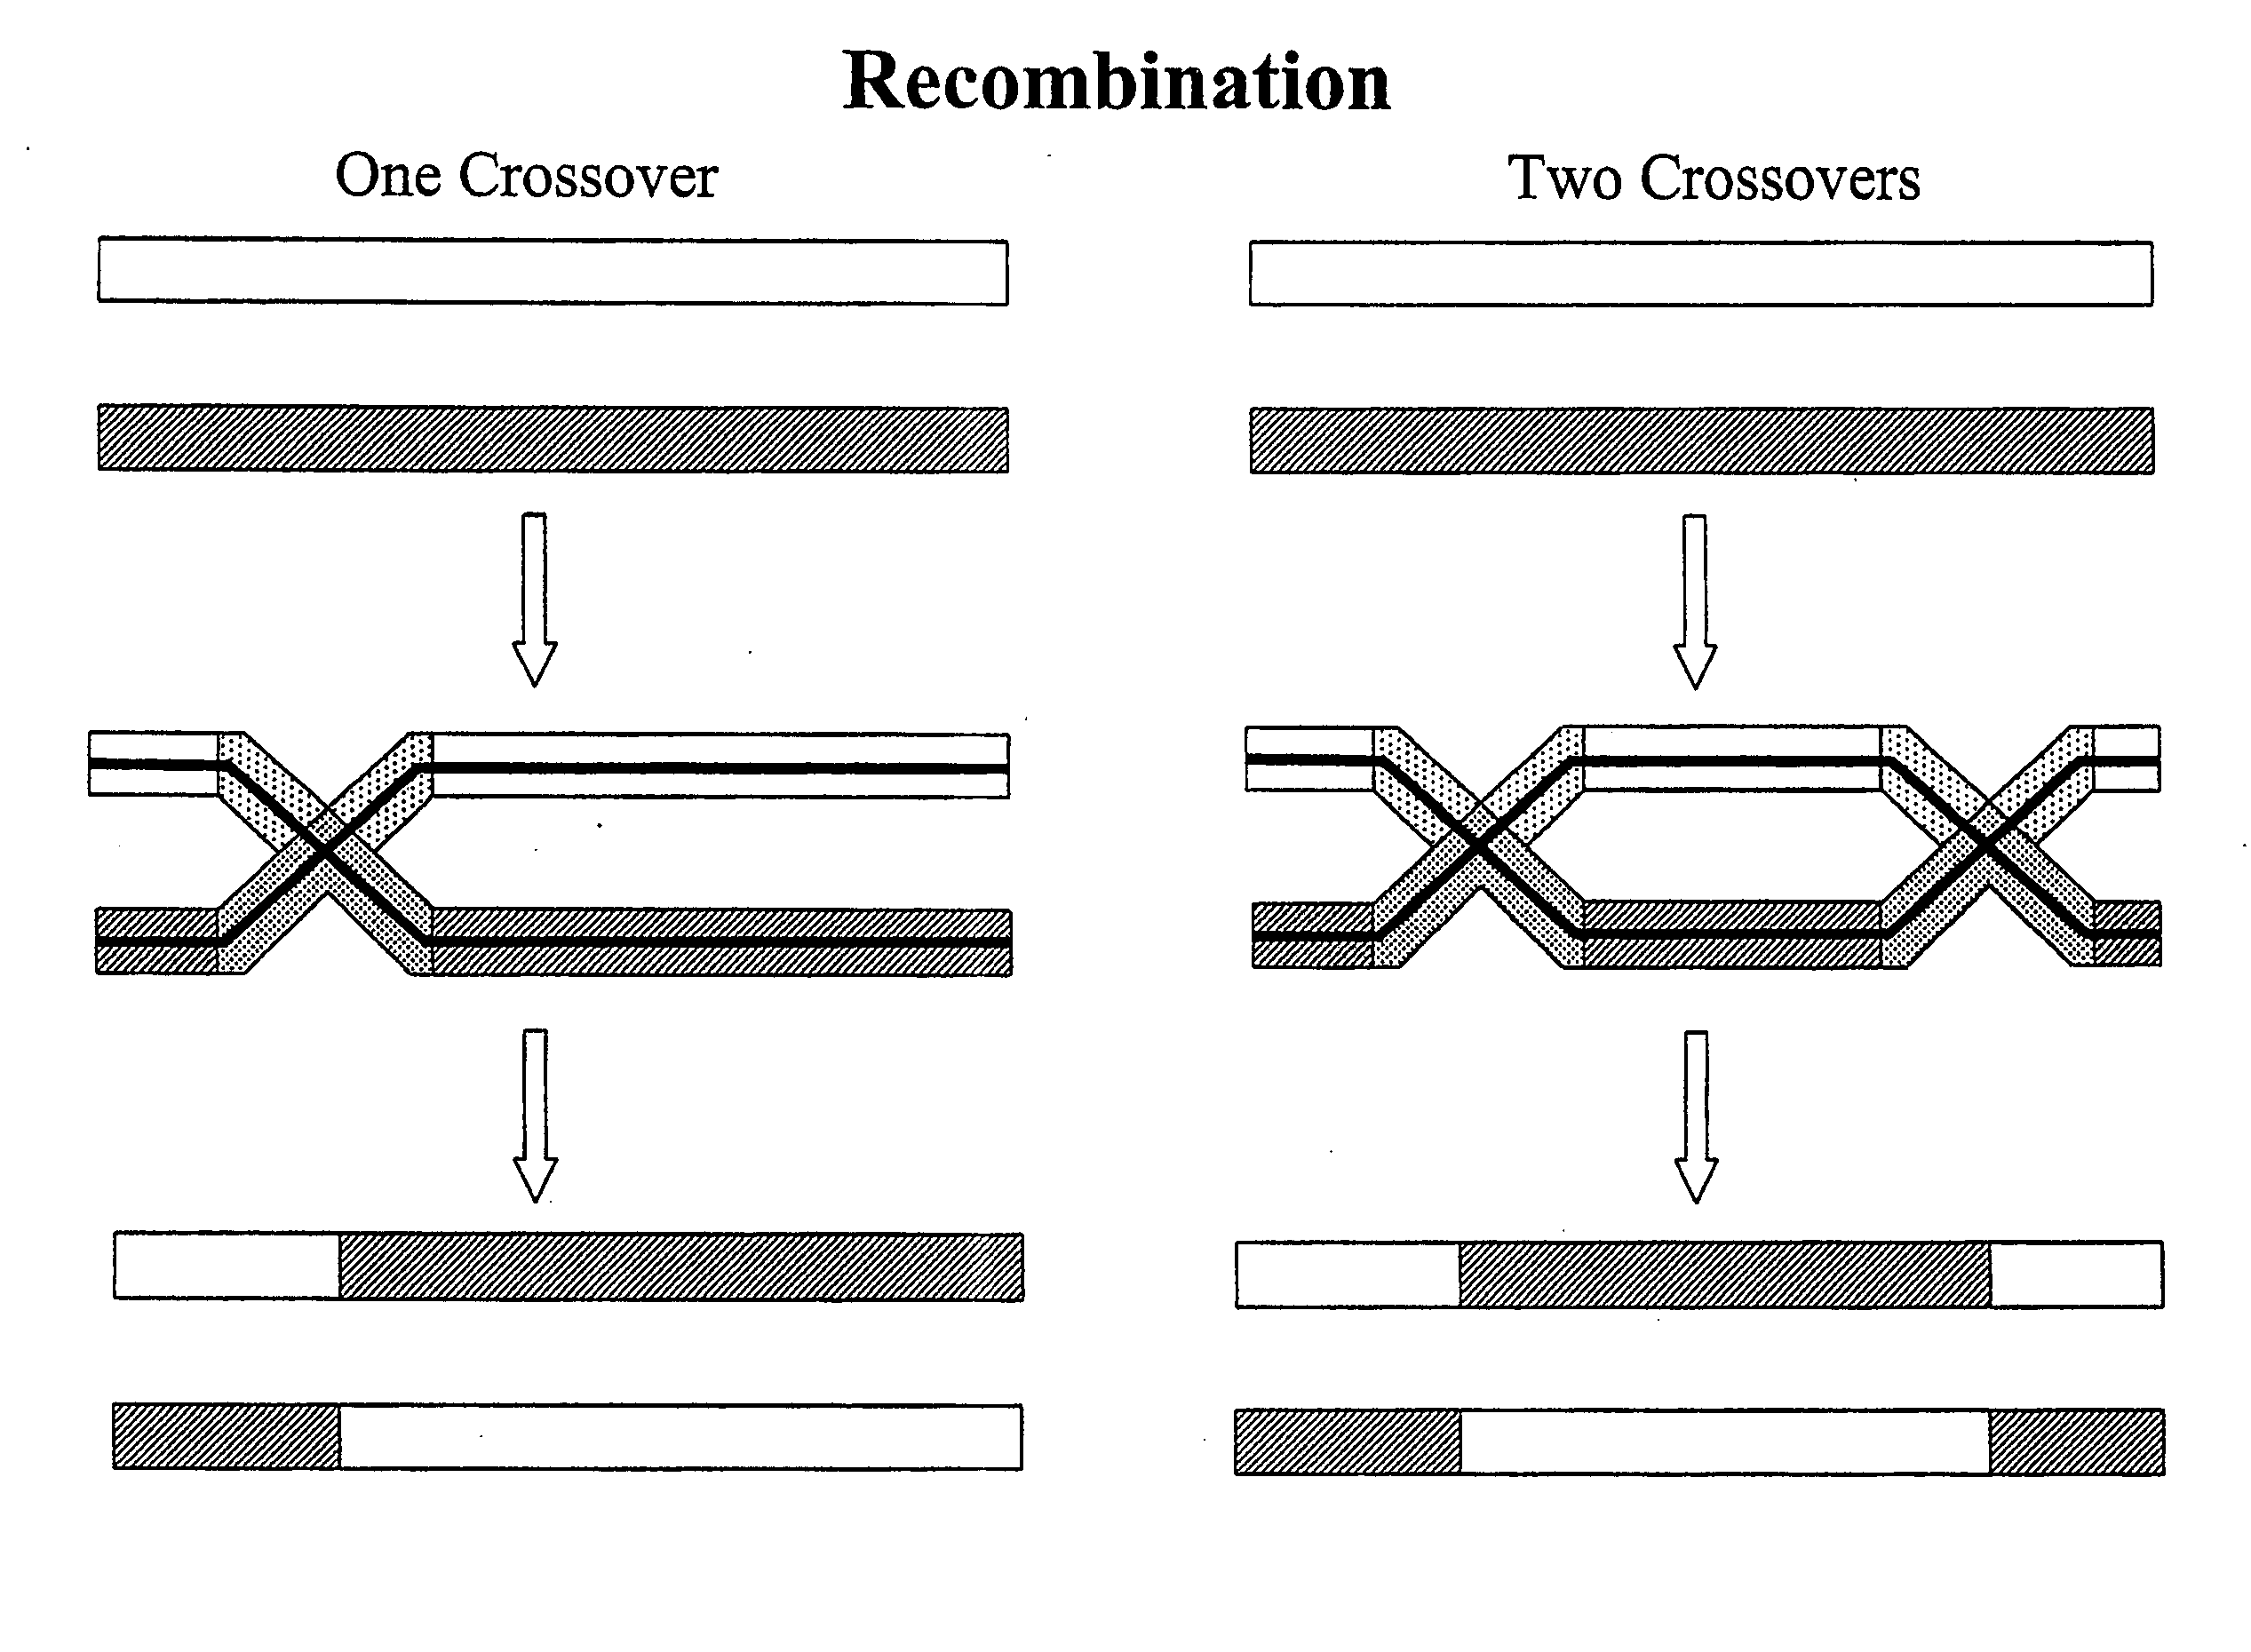 Copy choice recombination and uses thereof